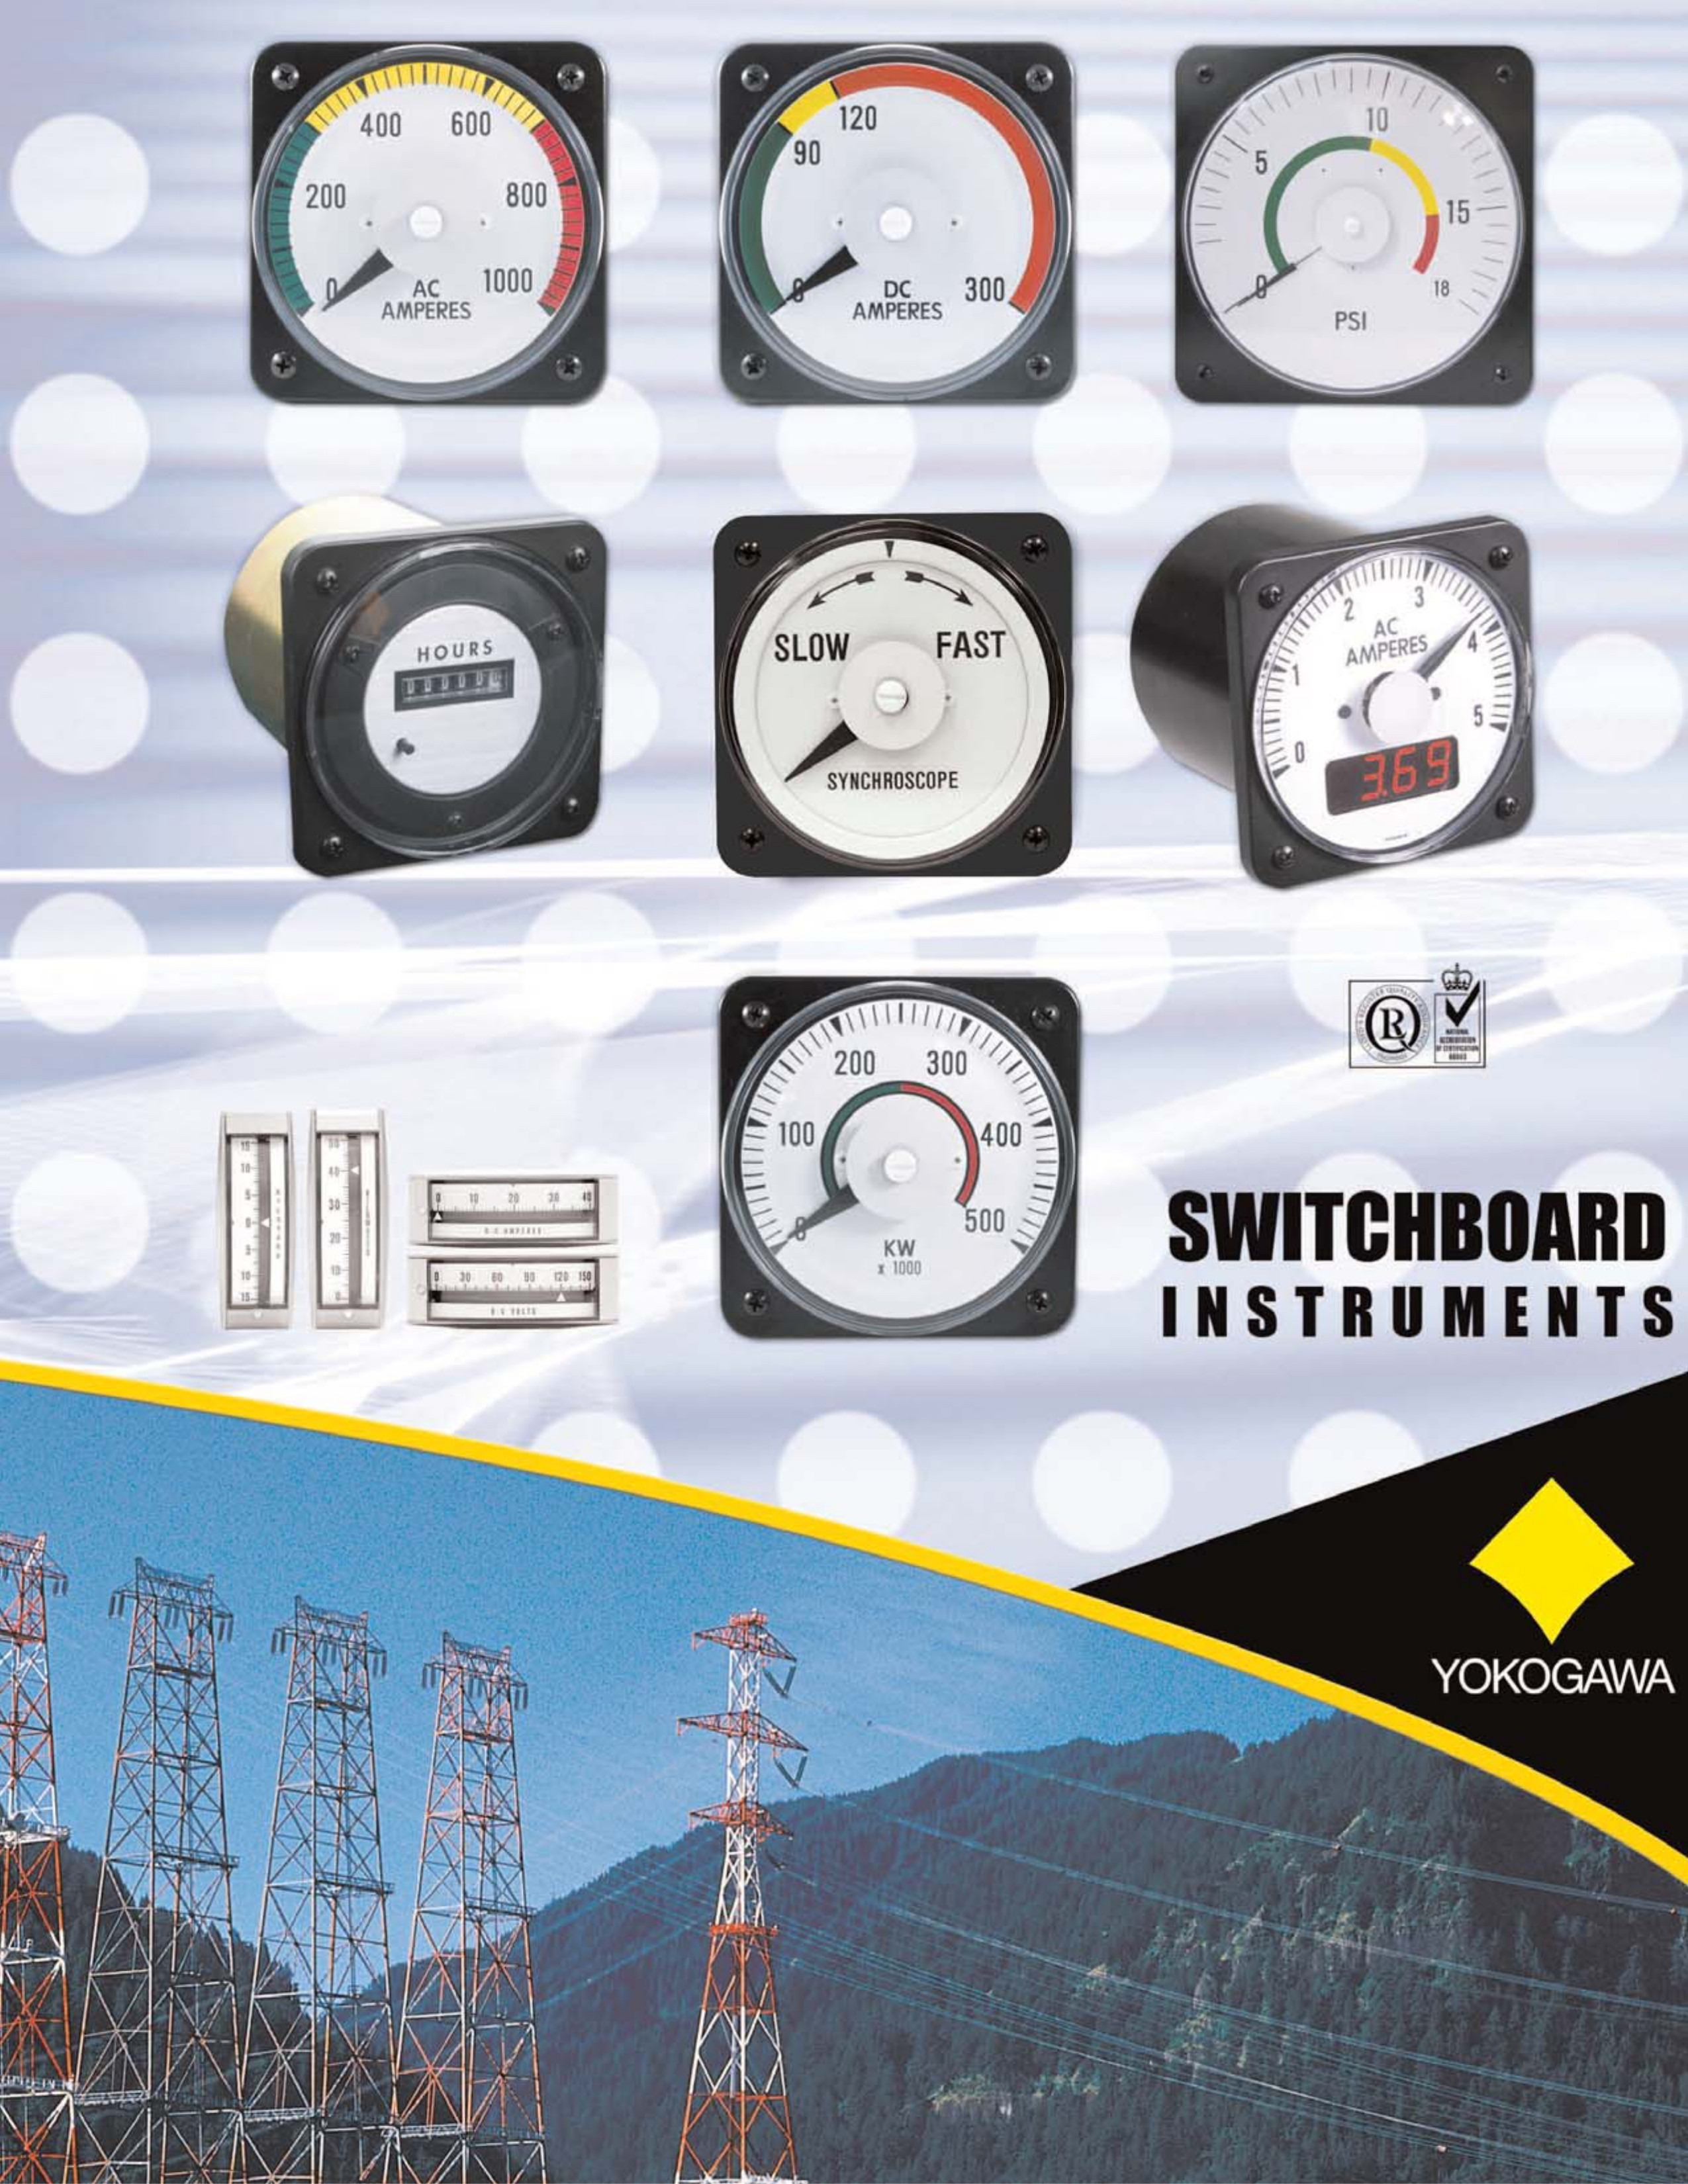 The front page of the catalog we found the ammeter in